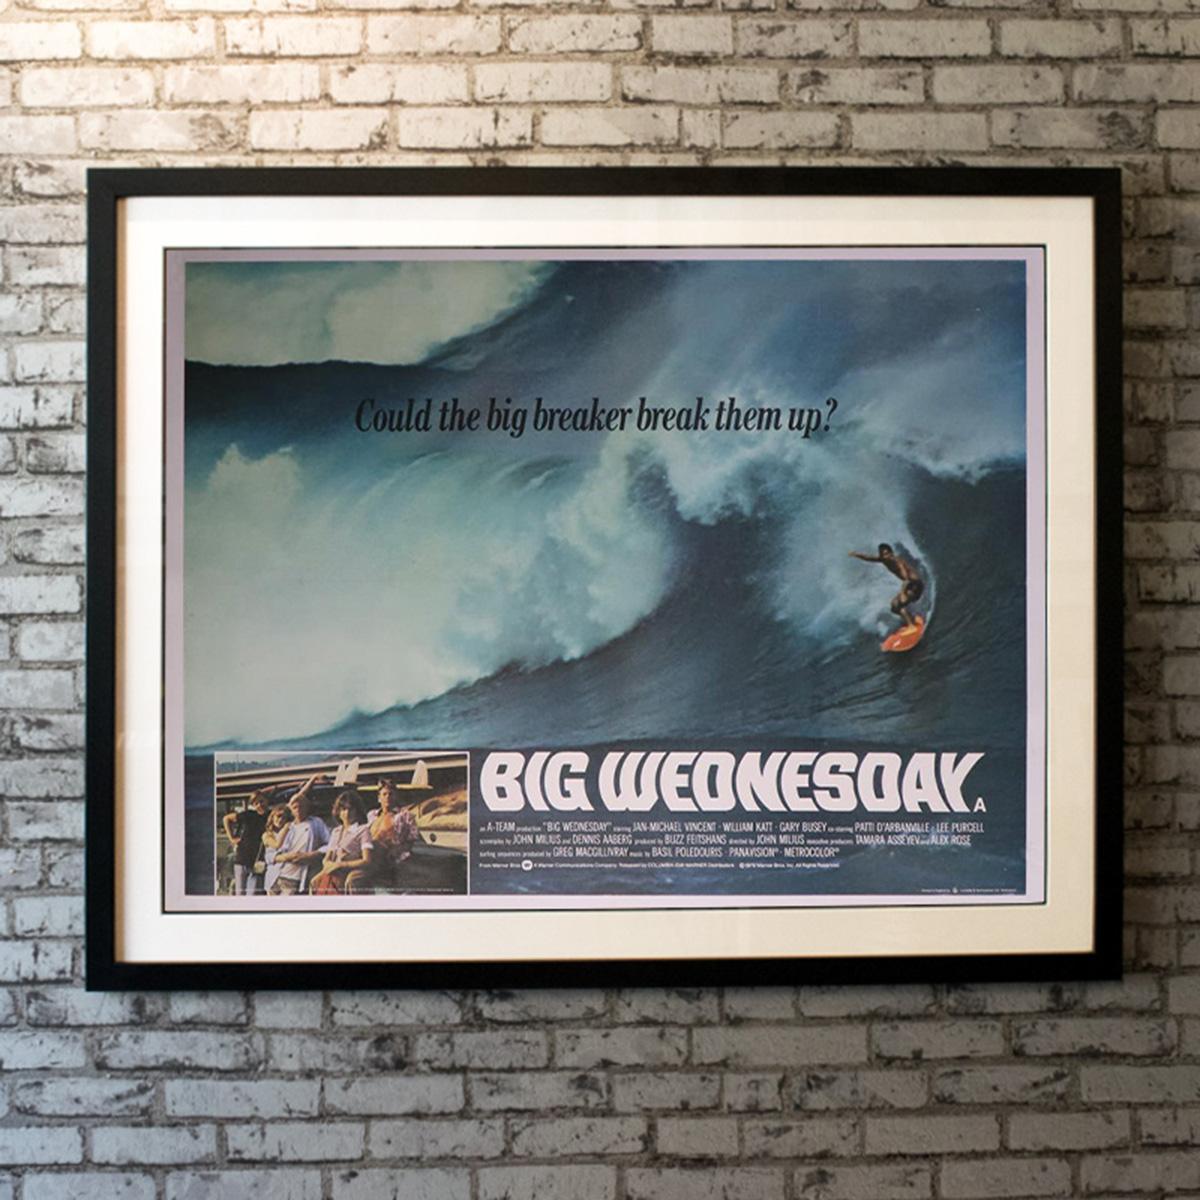 This very rare first release UK quad has by far the best artwork from any country for this seminal surfing movie.

Framing options:
Glass and single mount £250
Glass and double mount £275
Anti UV glass and single mount £350
Anti UV glass and